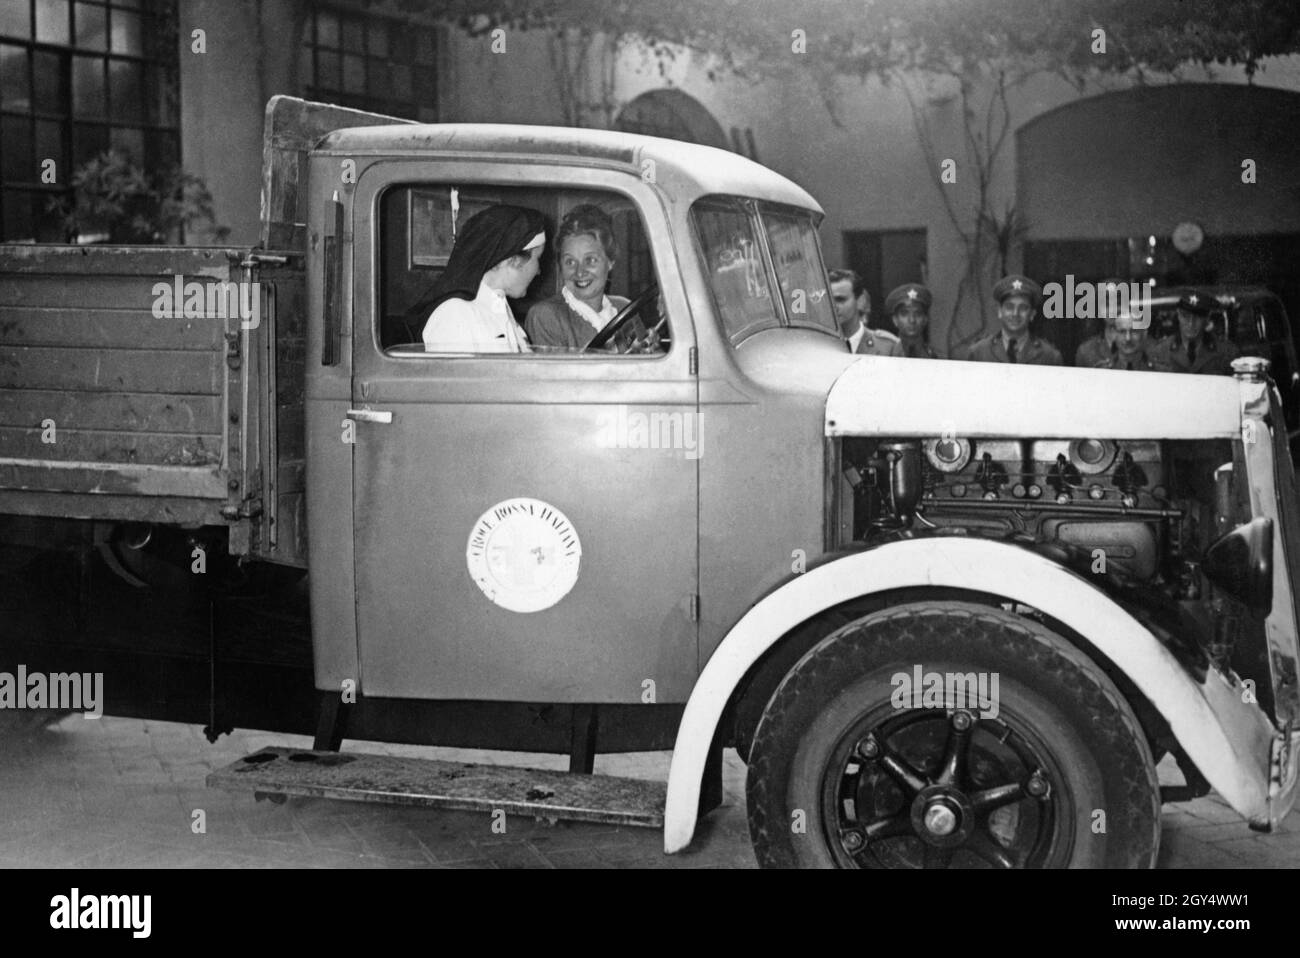 These two women are driving an ambulance of the Italian Red Cross. In the background some men are standing and watching them. The photograph was taken in 1940. [automated translation] Stock Photo